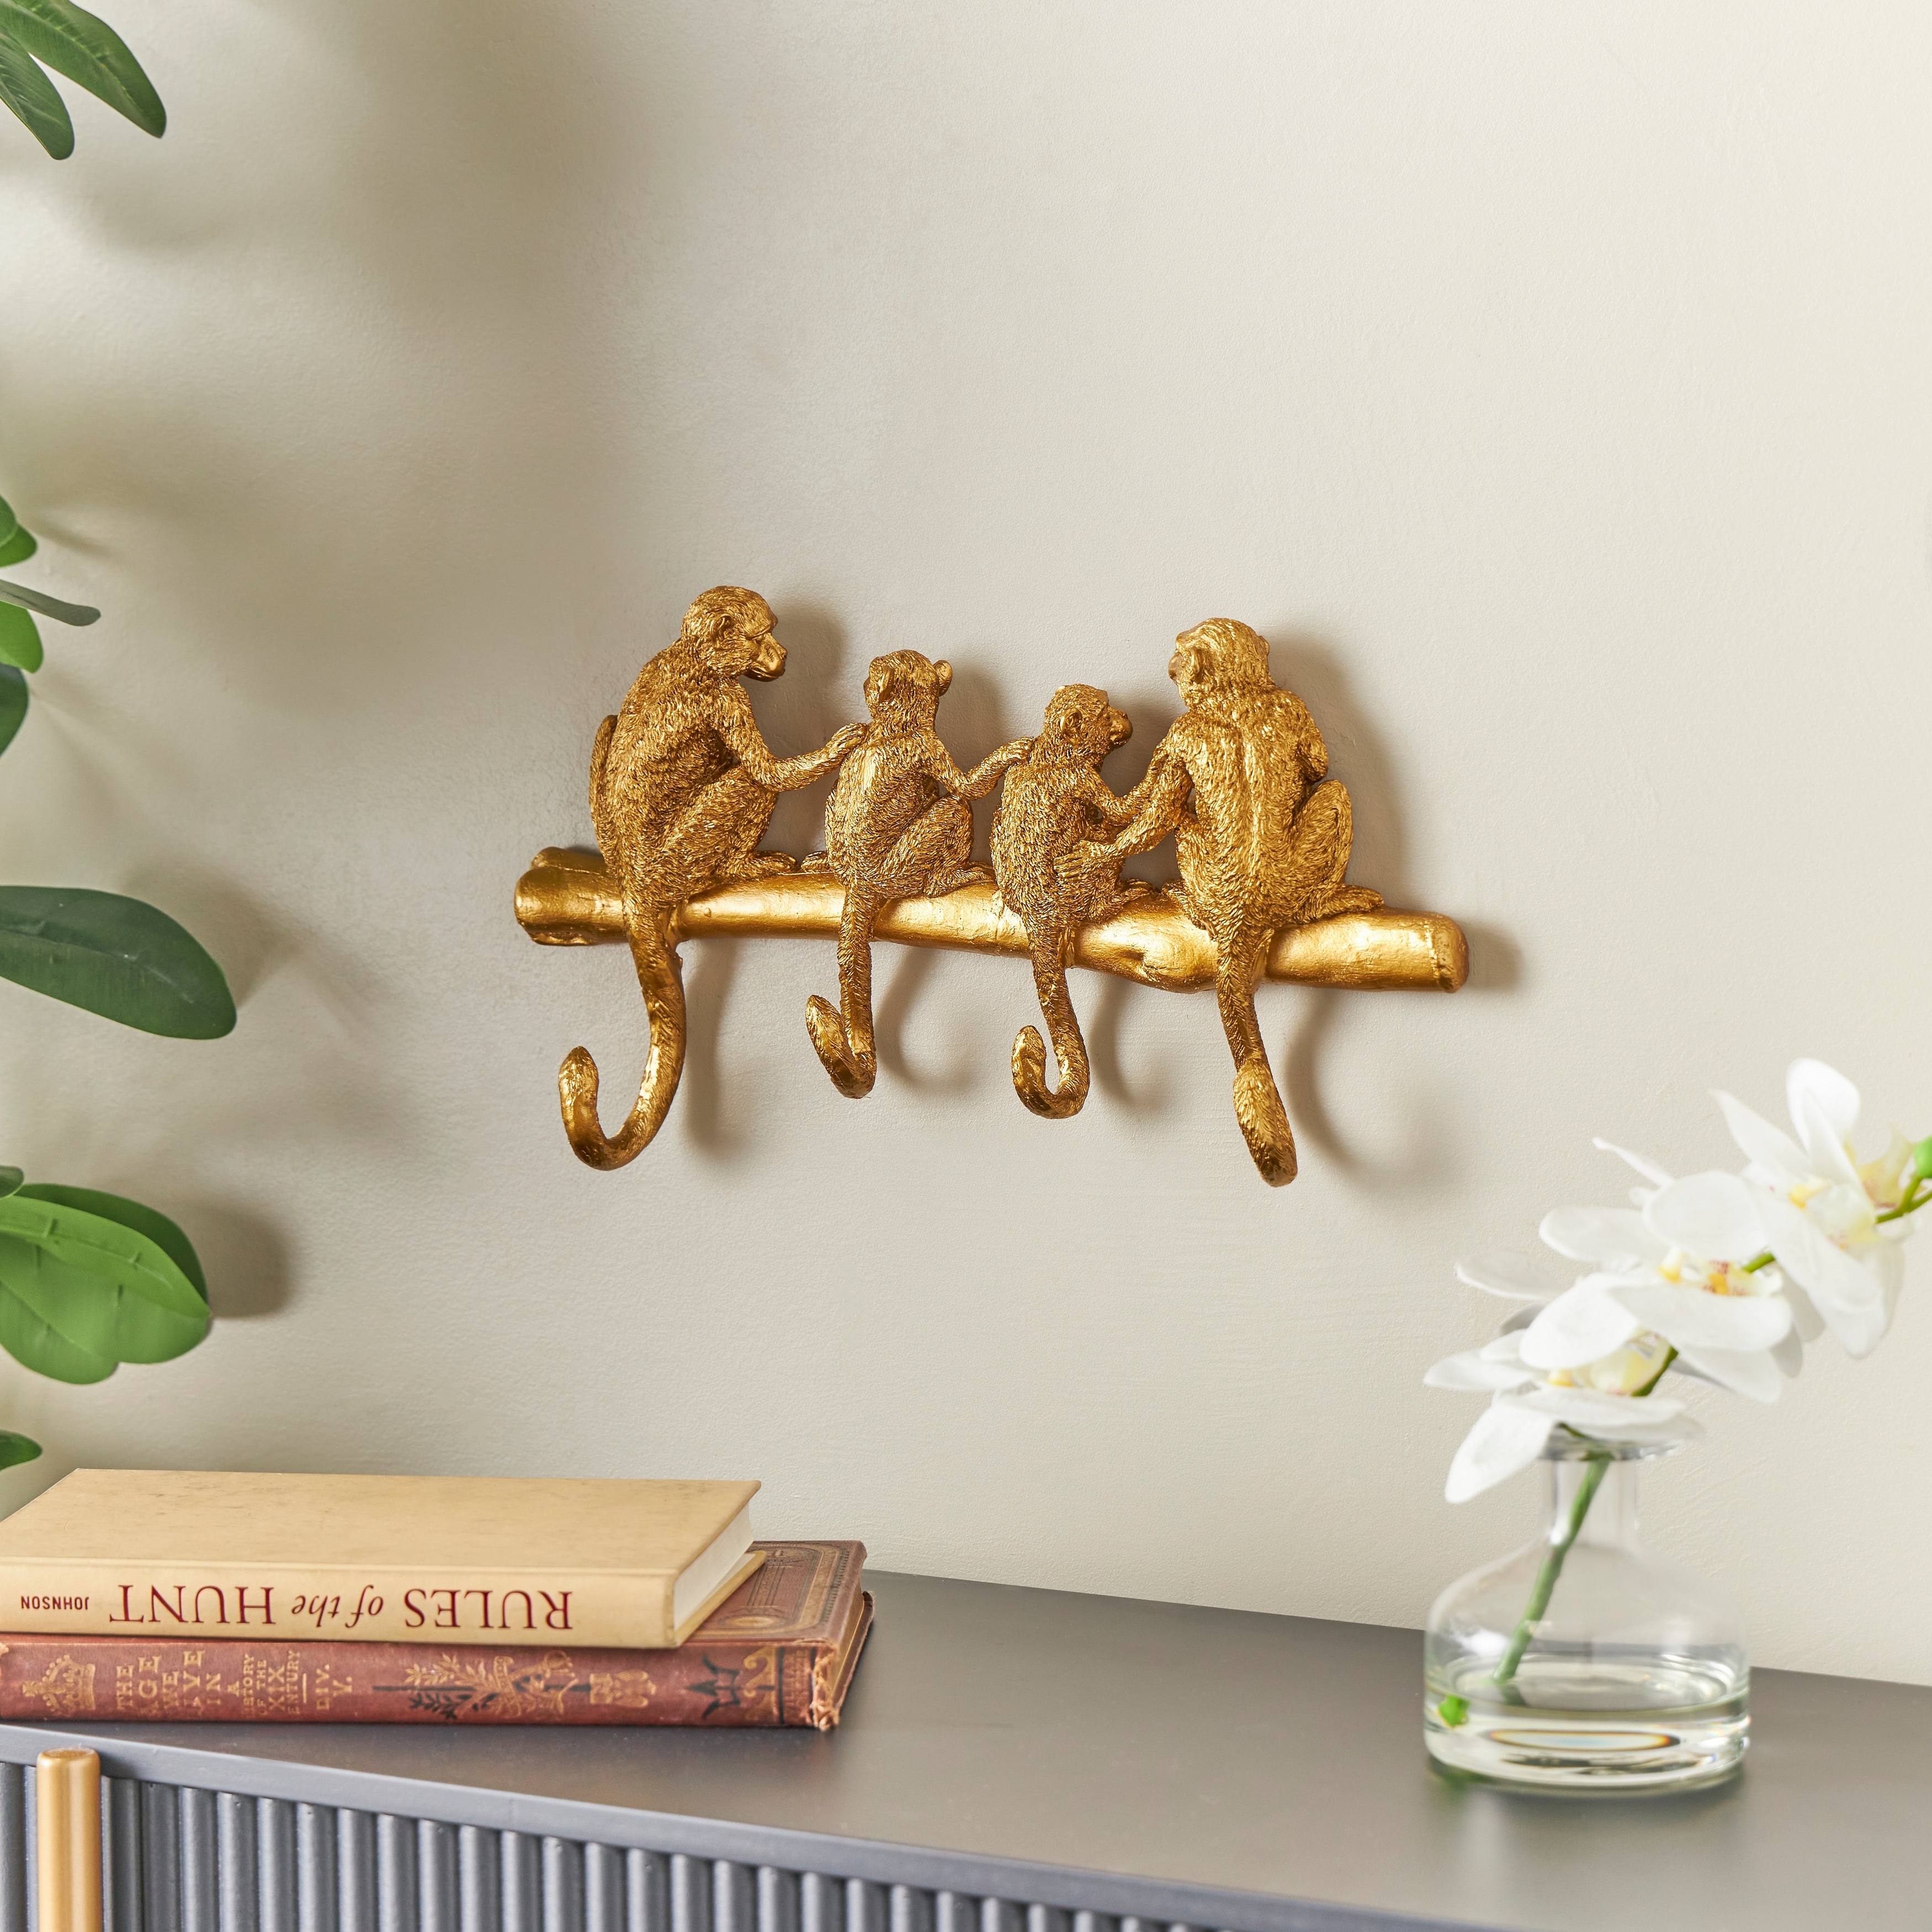 Bohemian & Eclectic Wall Hooks - Bed Bath & Beyond